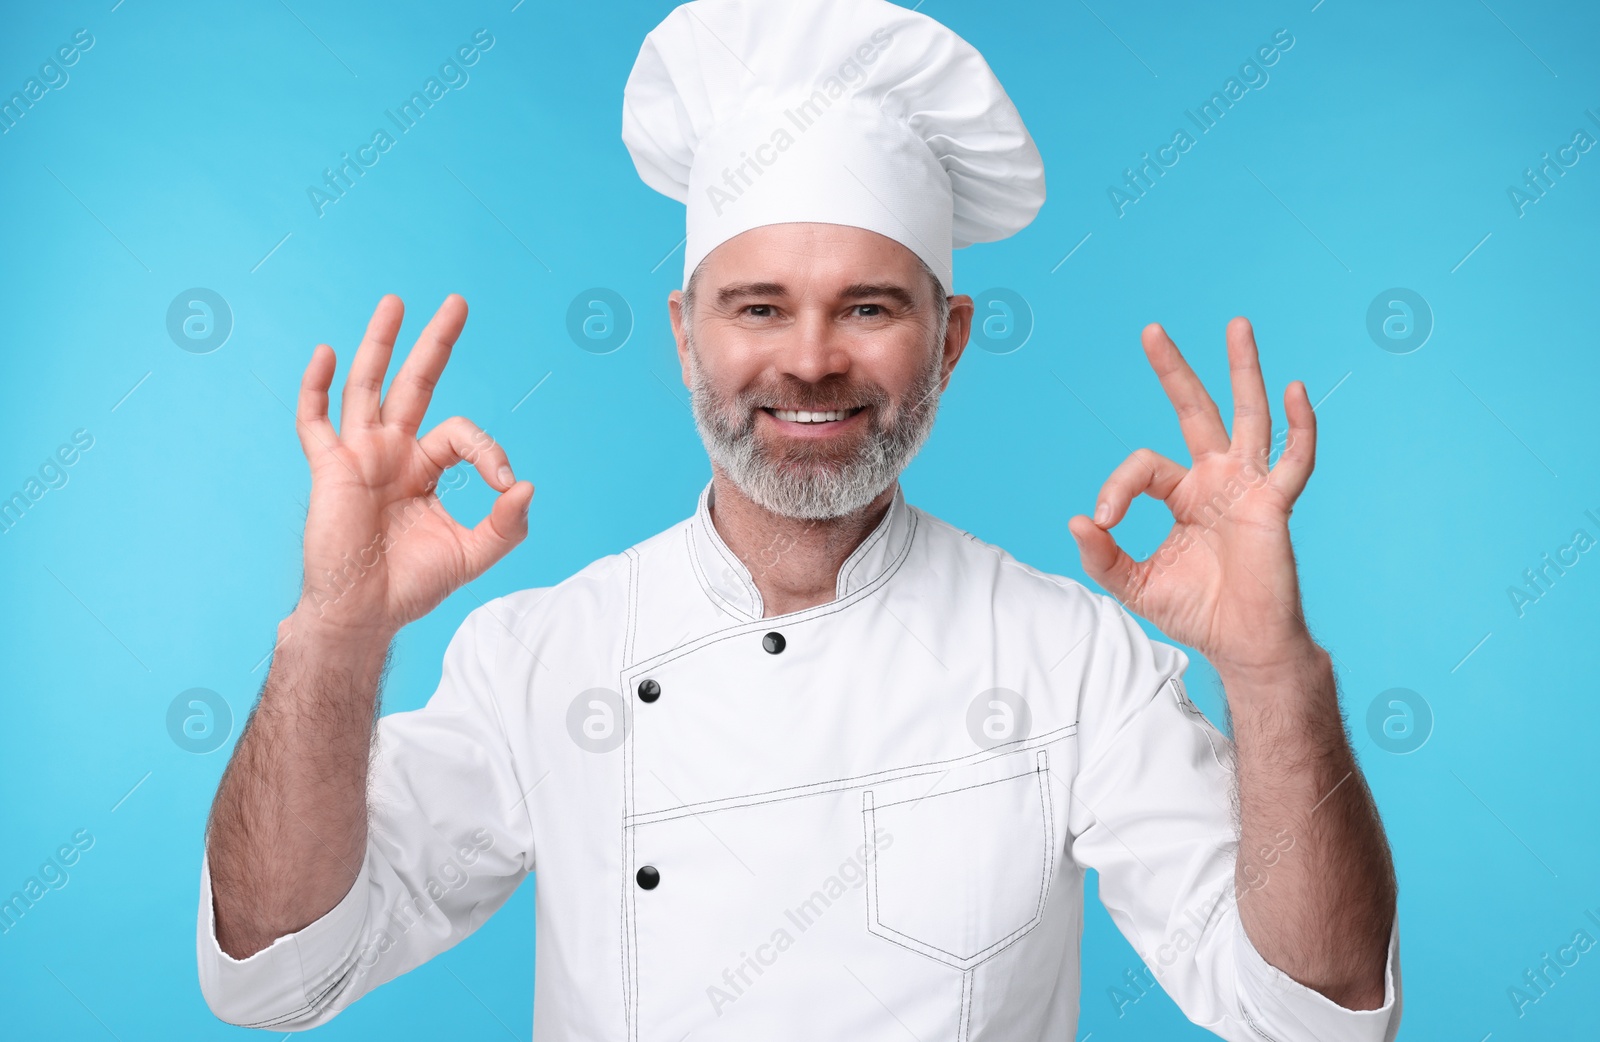 Photo of Happy chef in uniform showing OK gesture on light blue background